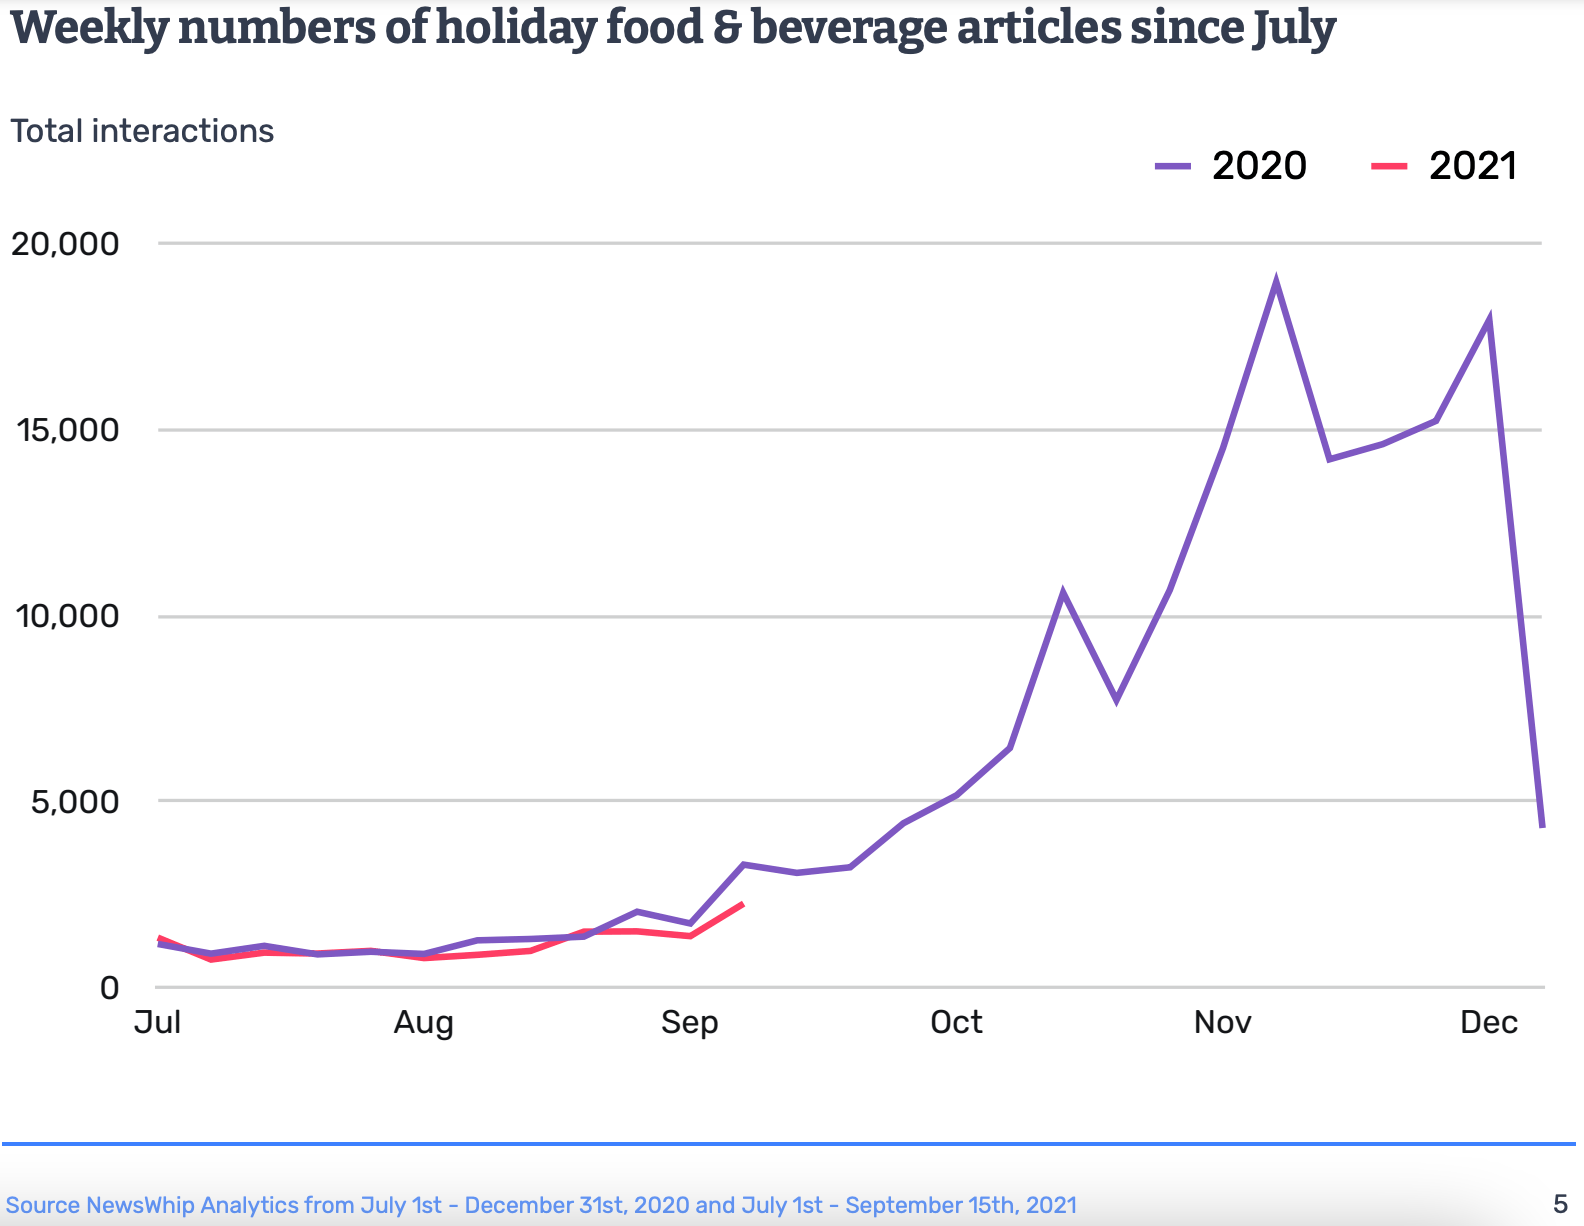 Graph of weekly holiday food and beverage articles published